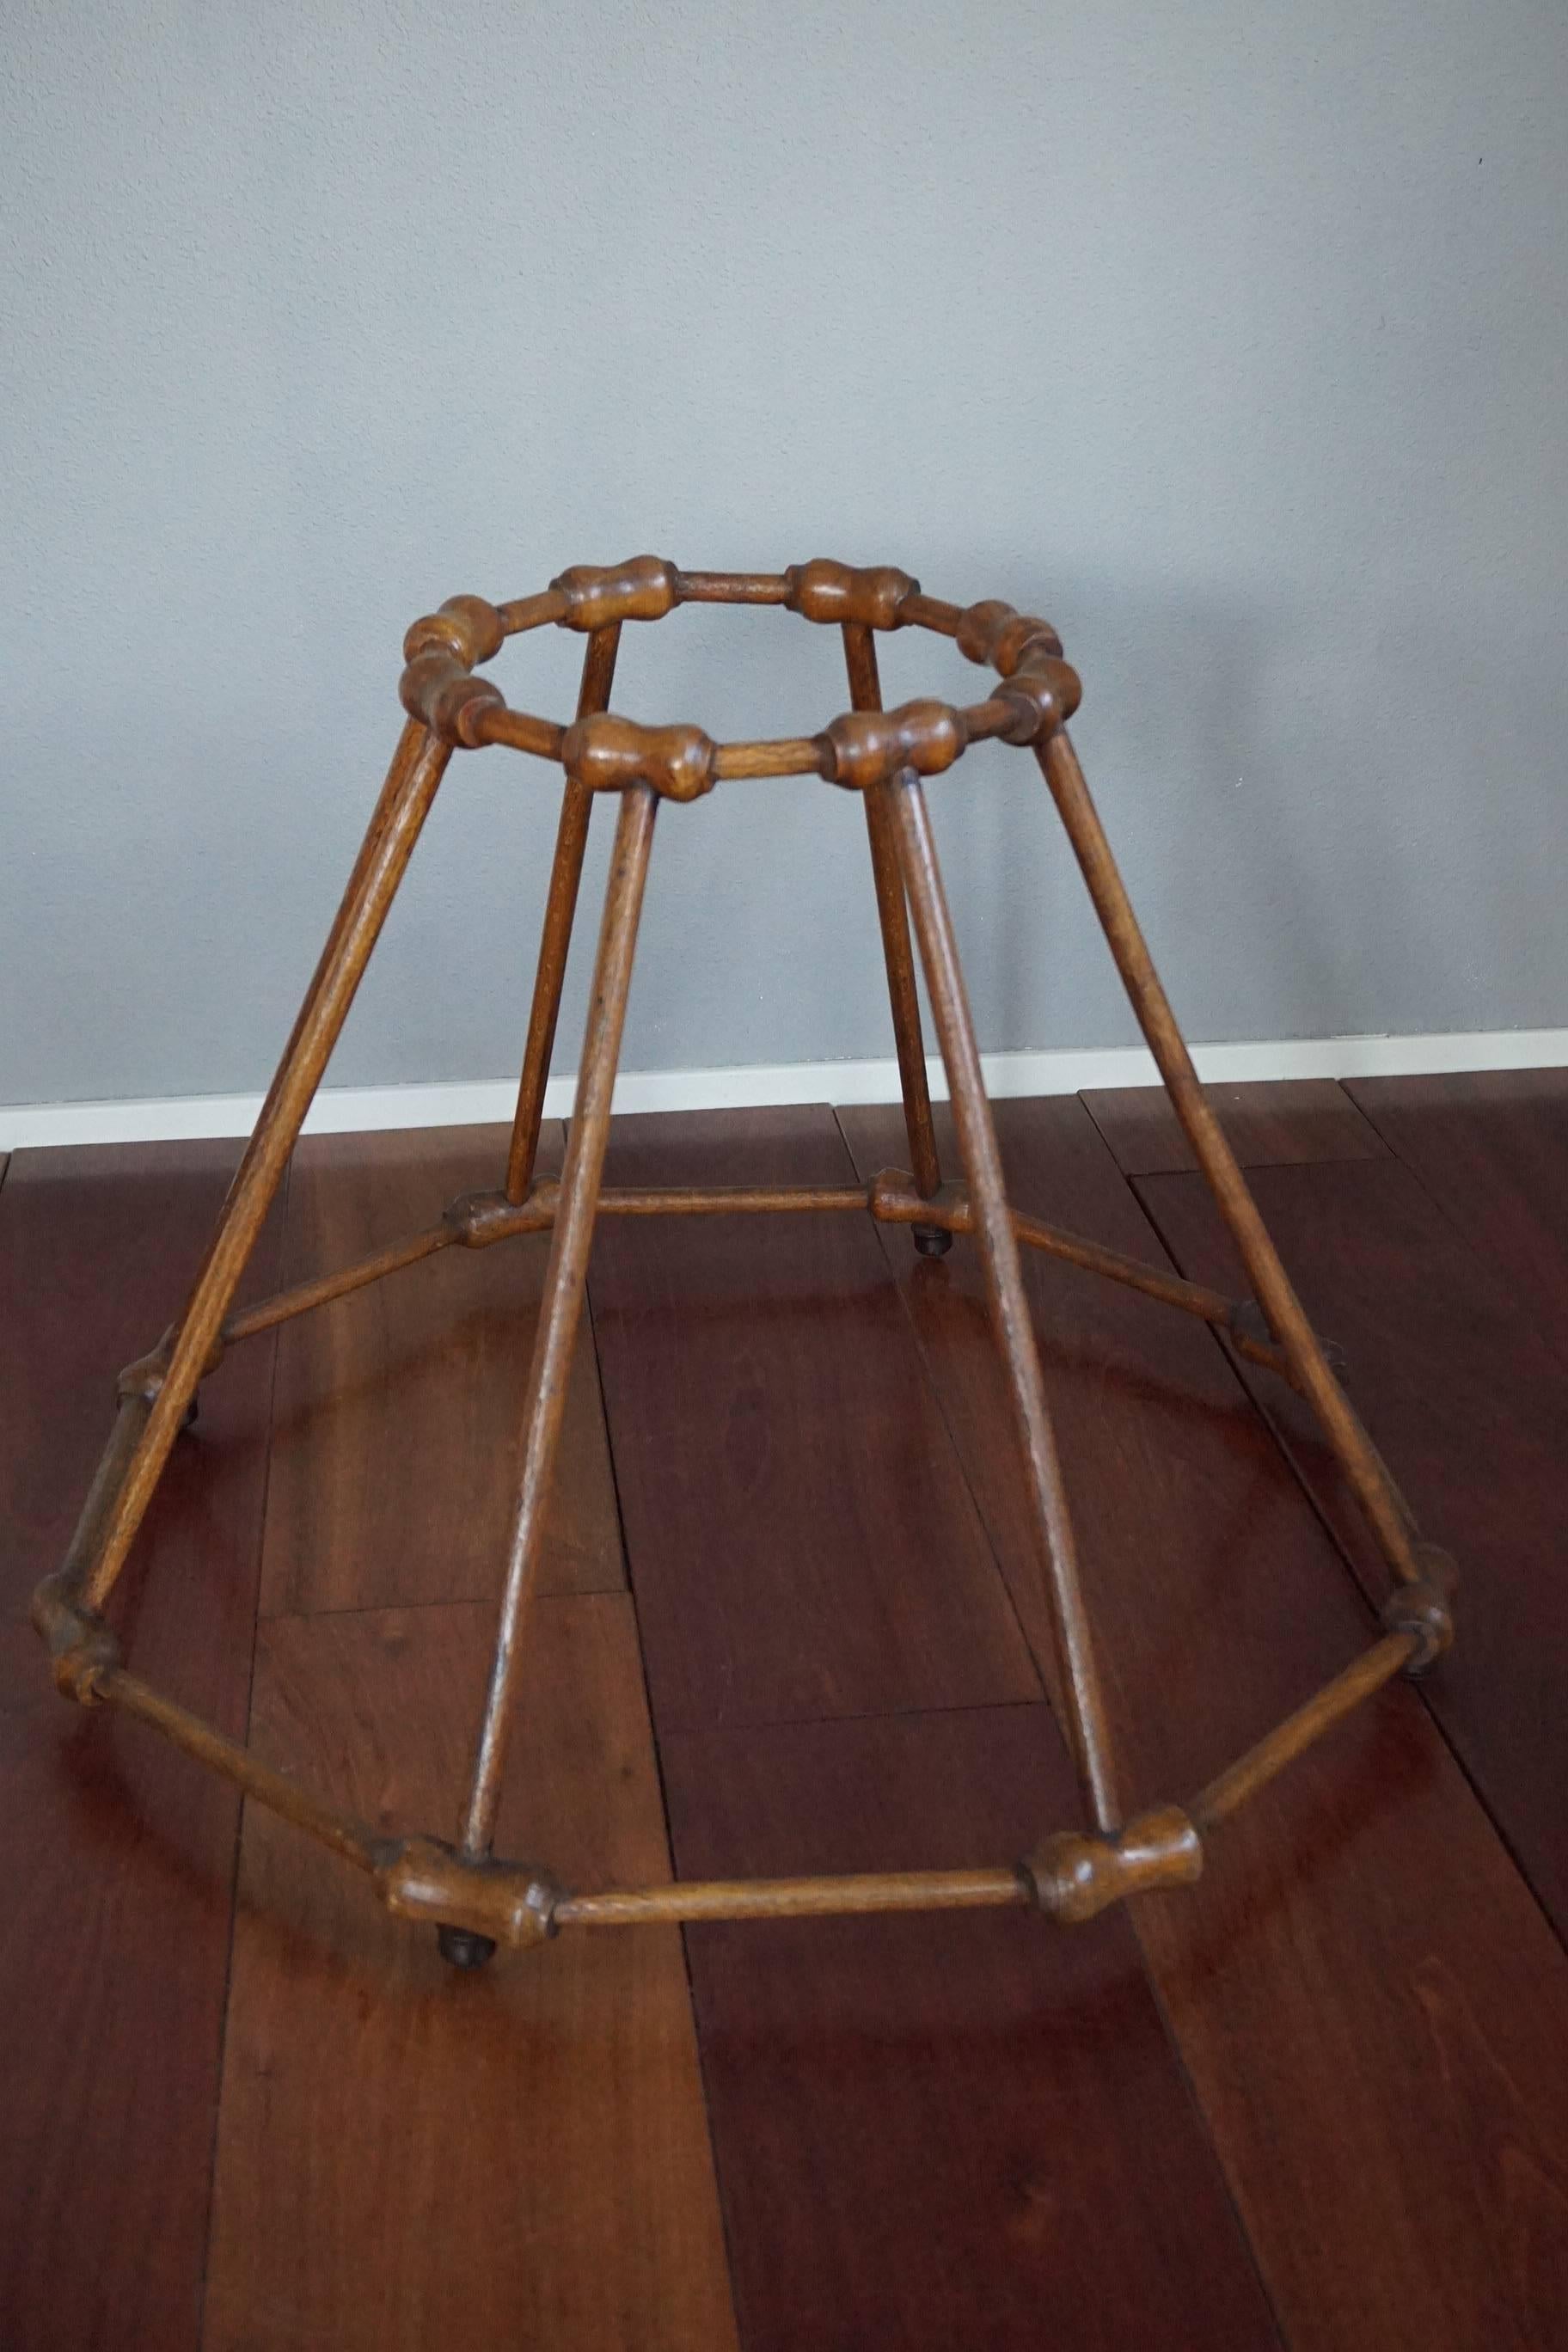 Amazing condition children's antique.

This very rare walker from the late 19th century is another one of our great recent finds. If finding one is not special enough, we found this rare specimen in completely original, excellent, very stabile and